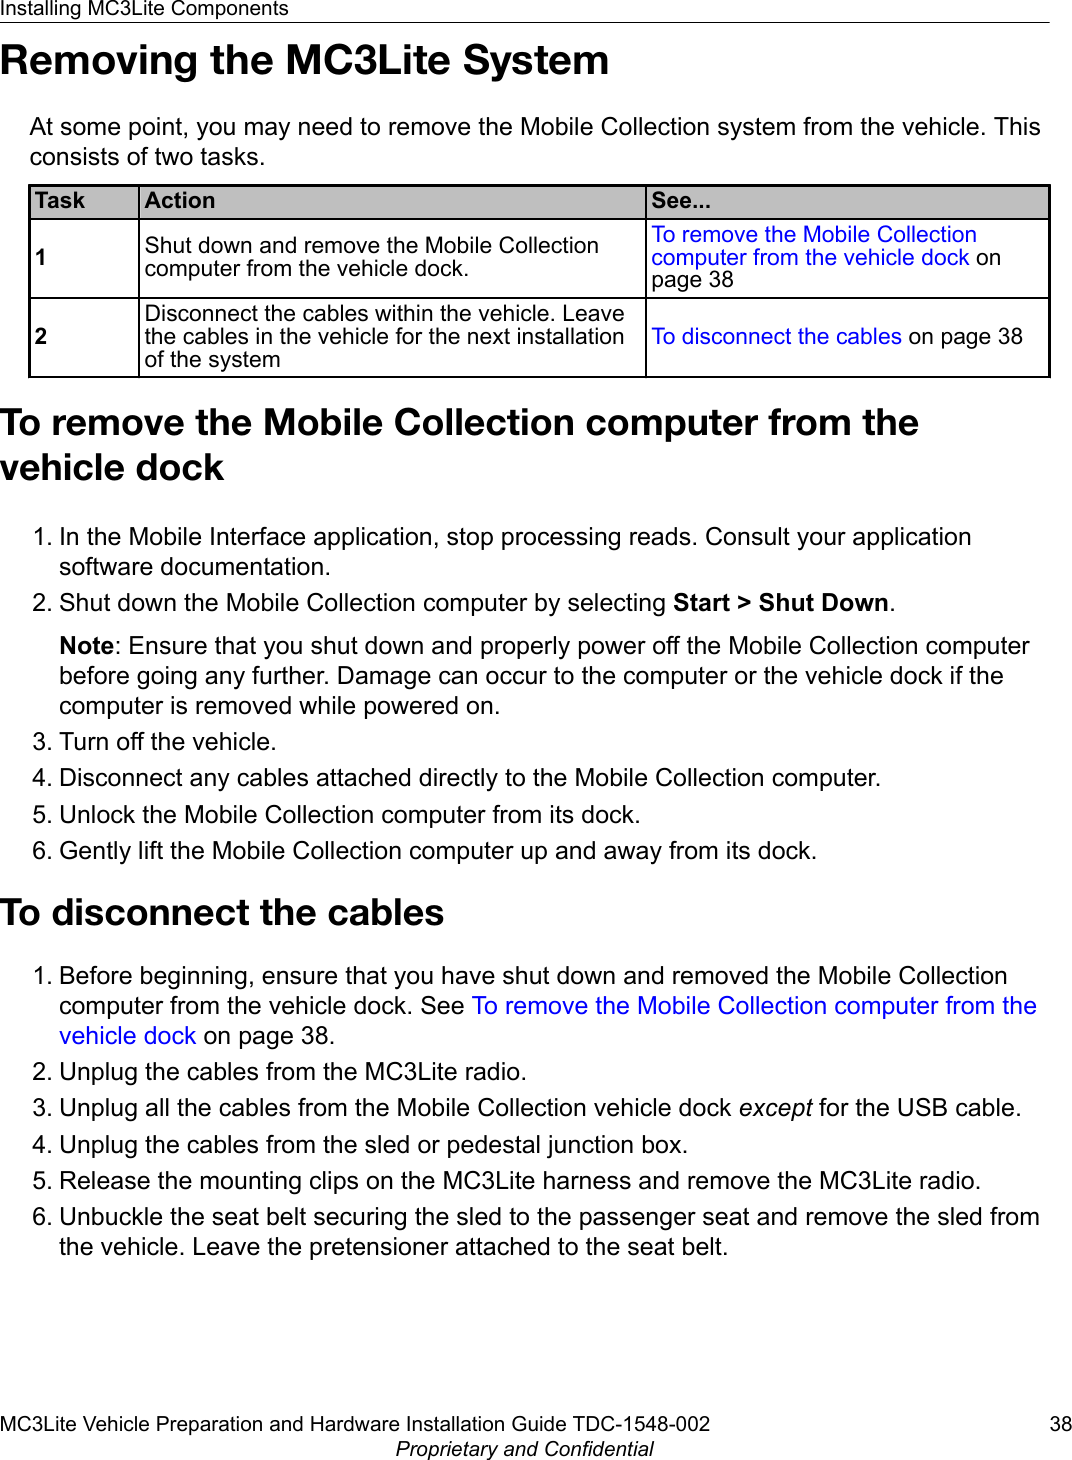 Removing the MC3Lite SystemAt some point, you may need to remove the Mobile Collection system from the vehicle. Thisconsists of two tasks.Task Action See...1Shut down and remove the Mobile Collectioncomputer from the vehicle dock.To remove the Mobile Collectioncomputer from the vehicle dock onpage 382Disconnect the cables within the vehicle. Leavethe cables in the vehicle for the next installationof the systemTo disconnect the cables on page 38To remove the Mobile Collection computer from thevehicle dock1. In the Mobile Interface application, stop processing reads. Consult your applicationsoftware documentation.2. Shut down the Mobile Collection computer by selecting Start &gt; Shut Down.Note: Ensure that you shut down and properly power off the Mobile Collection computerbefore going any further. Damage can occur to the computer or the vehicle dock if thecomputer is removed while powered on.3. Turn off the vehicle.4. Disconnect any cables attached directly to the Mobile Collection computer.5. Unlock the Mobile Collection computer from its dock.6. Gently lift the Mobile Collection computer up and away from its dock.To disconnect the cables1. Before beginning, ensure that you have shut down and removed the Mobile Collectioncomputer from the vehicle dock. See To remove the Mobile Collection computer from thevehicle dock on page 38.2. Unplug the cables from the MC3Lite radio.3. Unplug all the cables from the Mobile Collection vehicle dock except for the USB cable.4. Unplug the cables from the sled or pedestal junction box.5. Release the mounting clips on the MC3Lite harness and remove the MC3Lite radio.6. Unbuckle the seat belt securing the sled to the passenger seat and remove the sled fromthe vehicle. Leave the pretensioner attached to the seat belt.Installing MC3Lite ComponentsMC3Lite Vehicle Preparation and Hardware Installation Guide TDC-1548-002 38Proprietary and Confidential